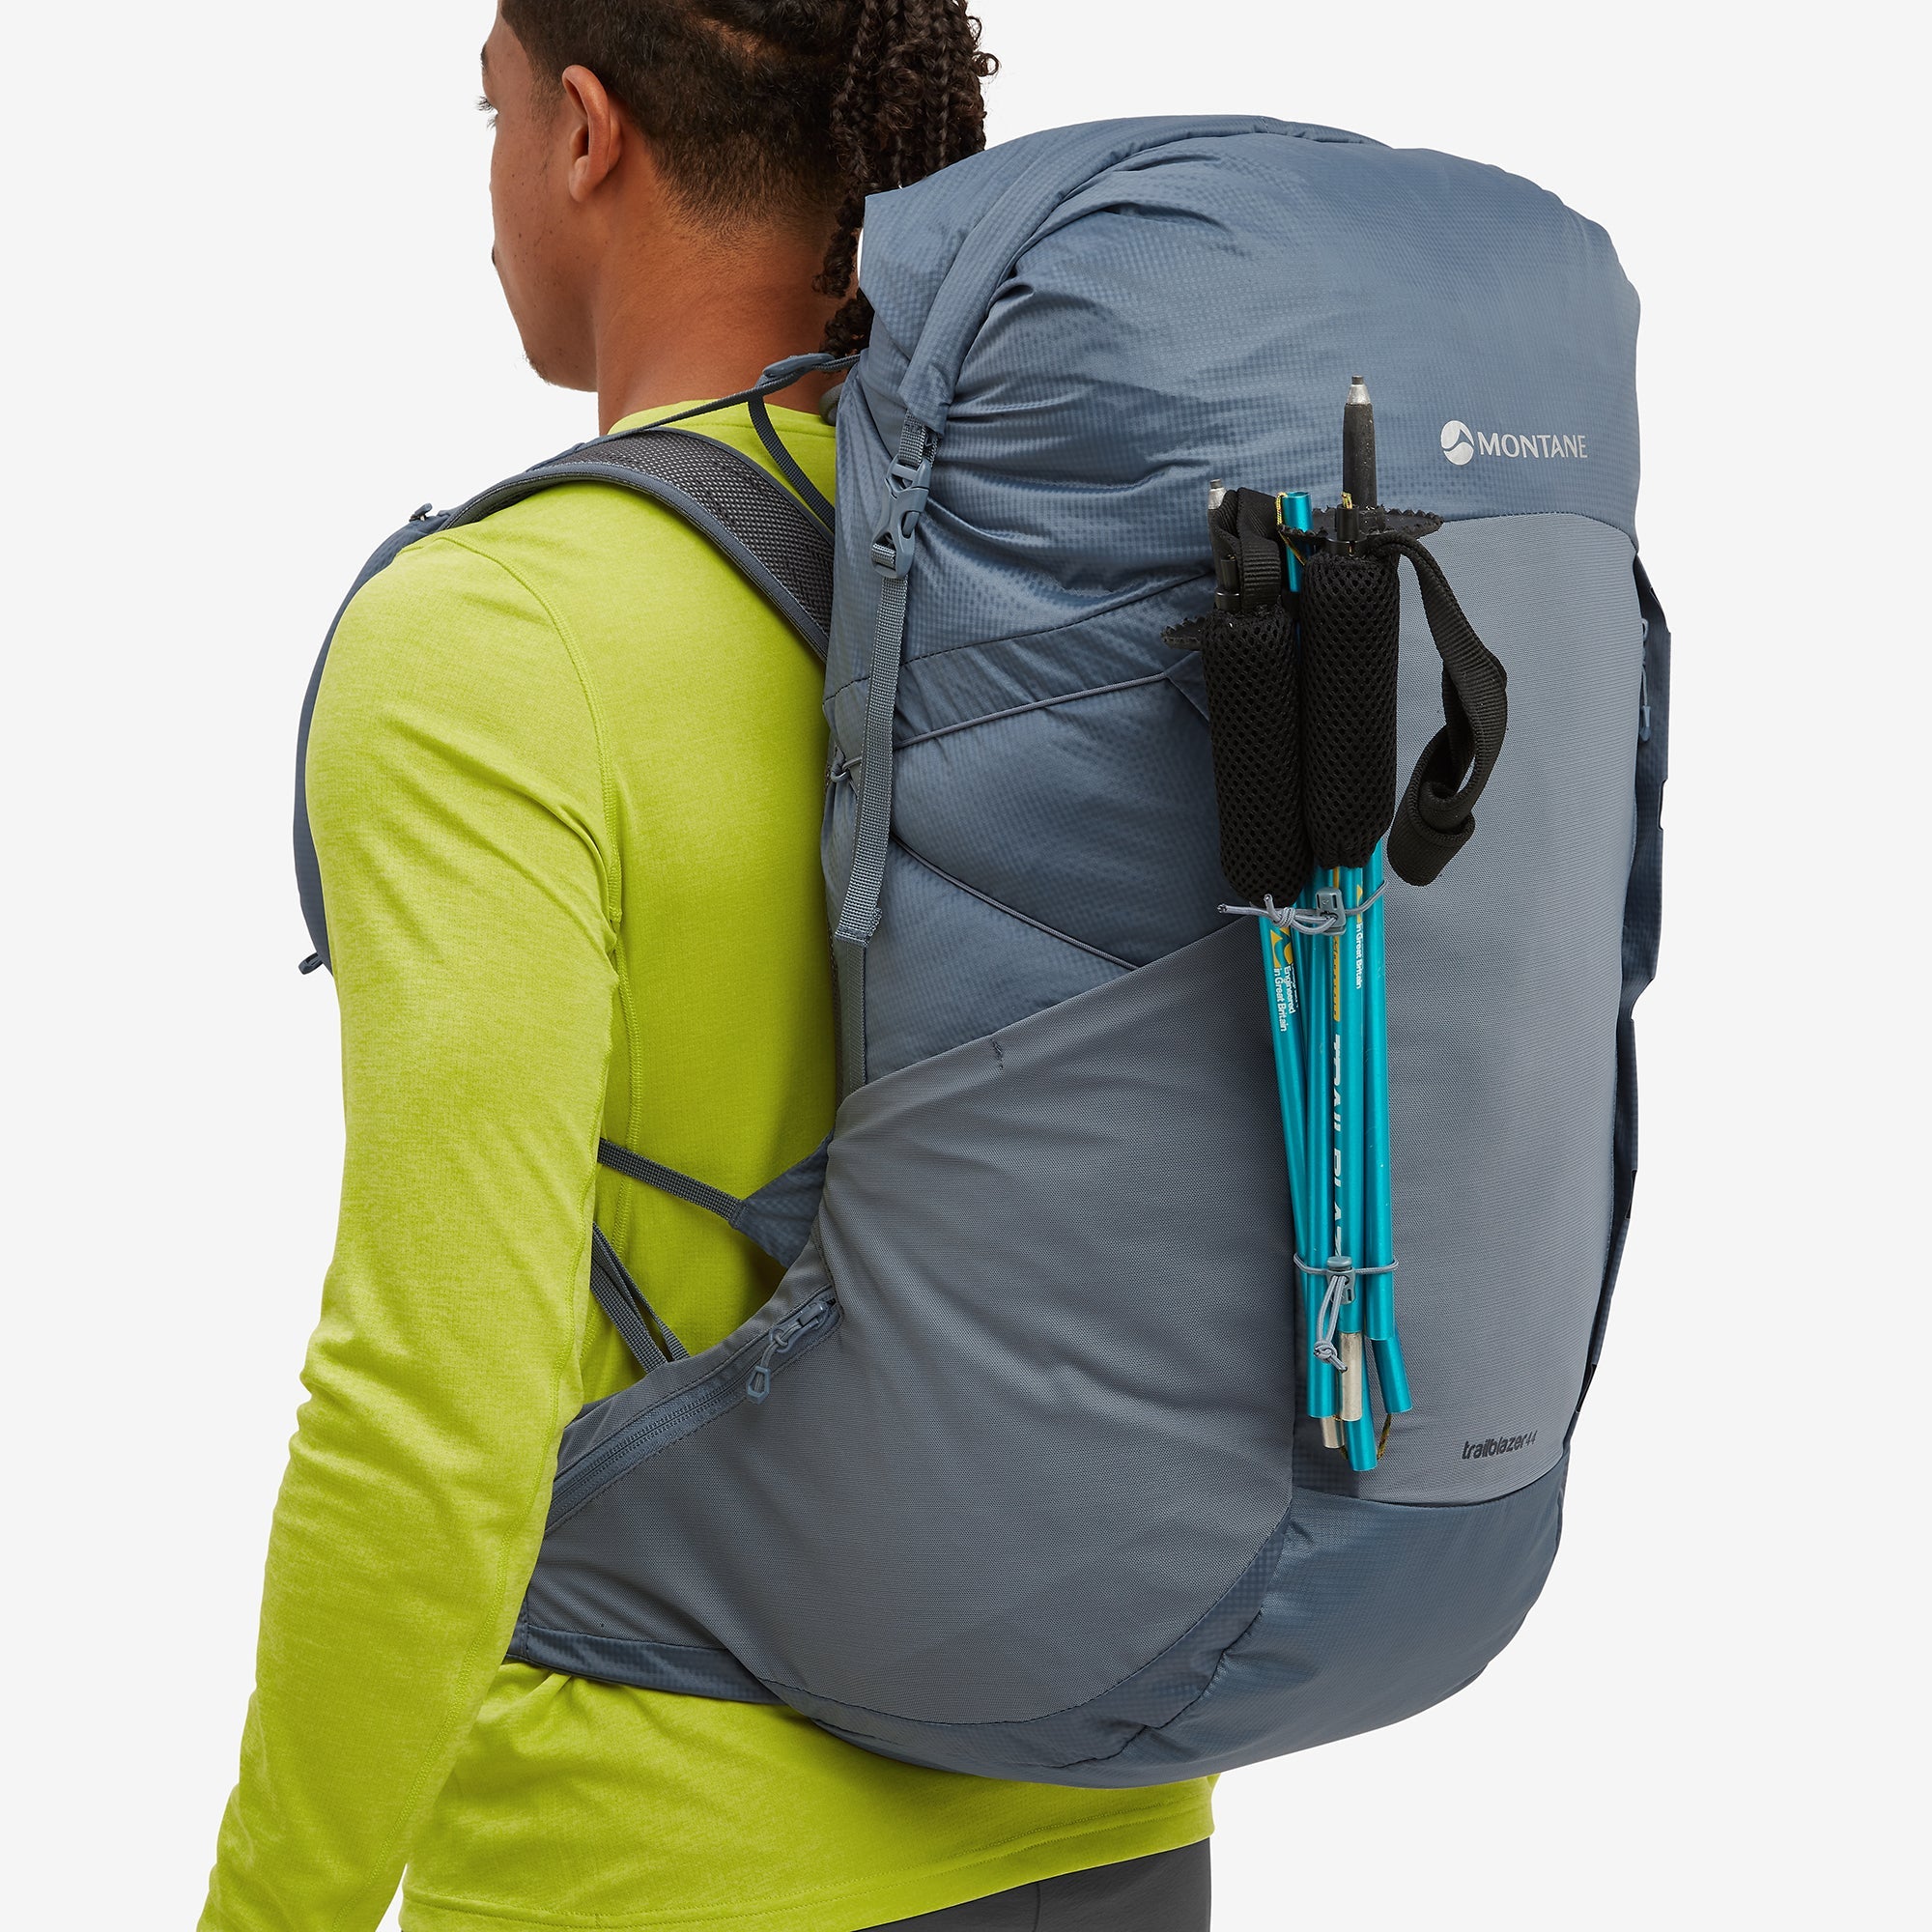 Best for multi-day missions and expanded capacity for additional storage | Trailblazer 44L Backpack